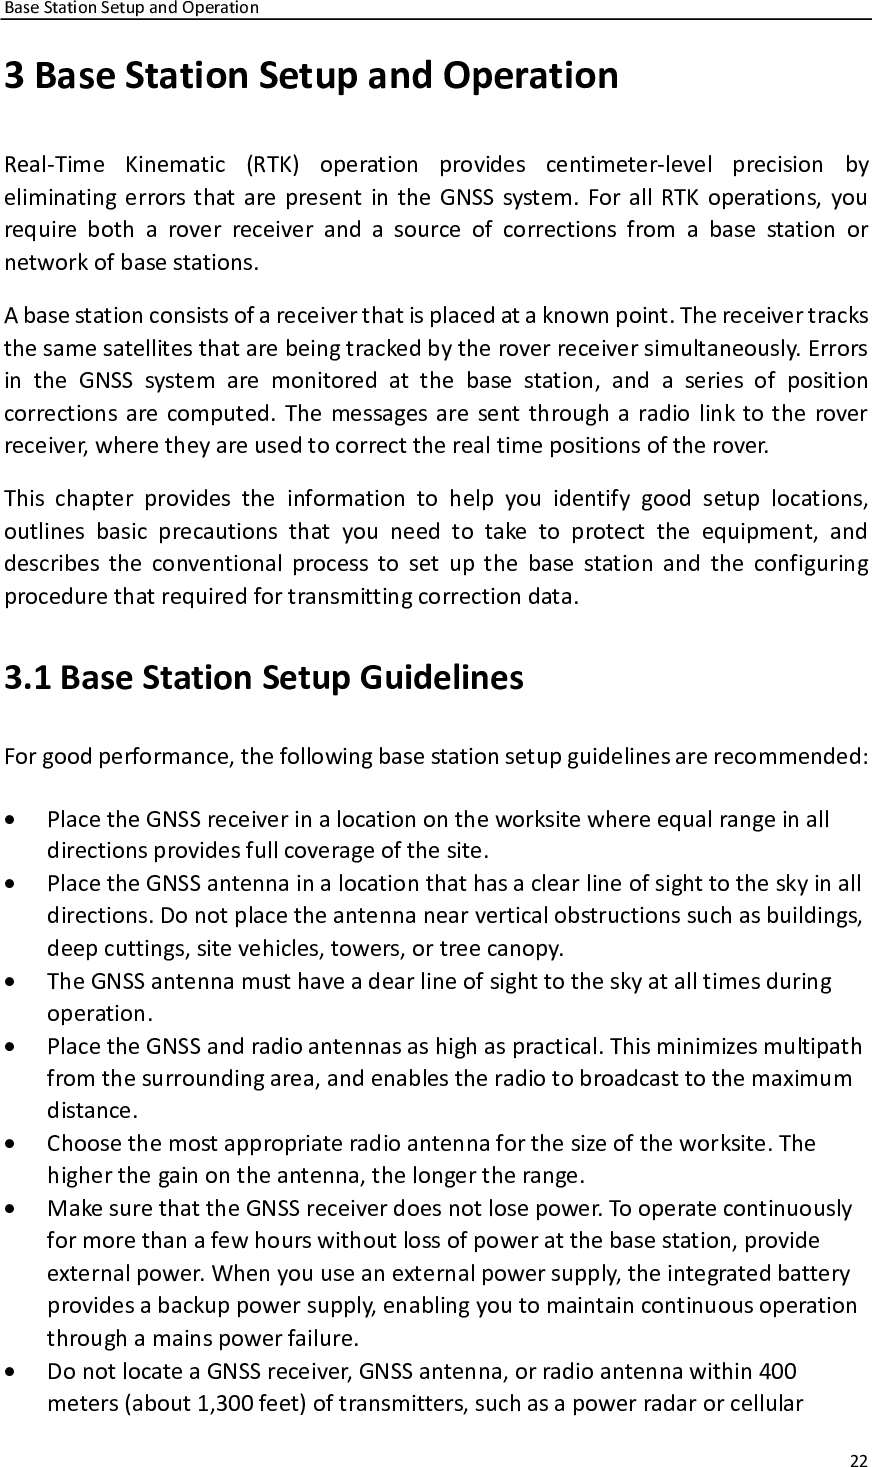 Page 23 of Huace Navigation Technology A01013 Geodetic GNSS Receiver E91 User Manual